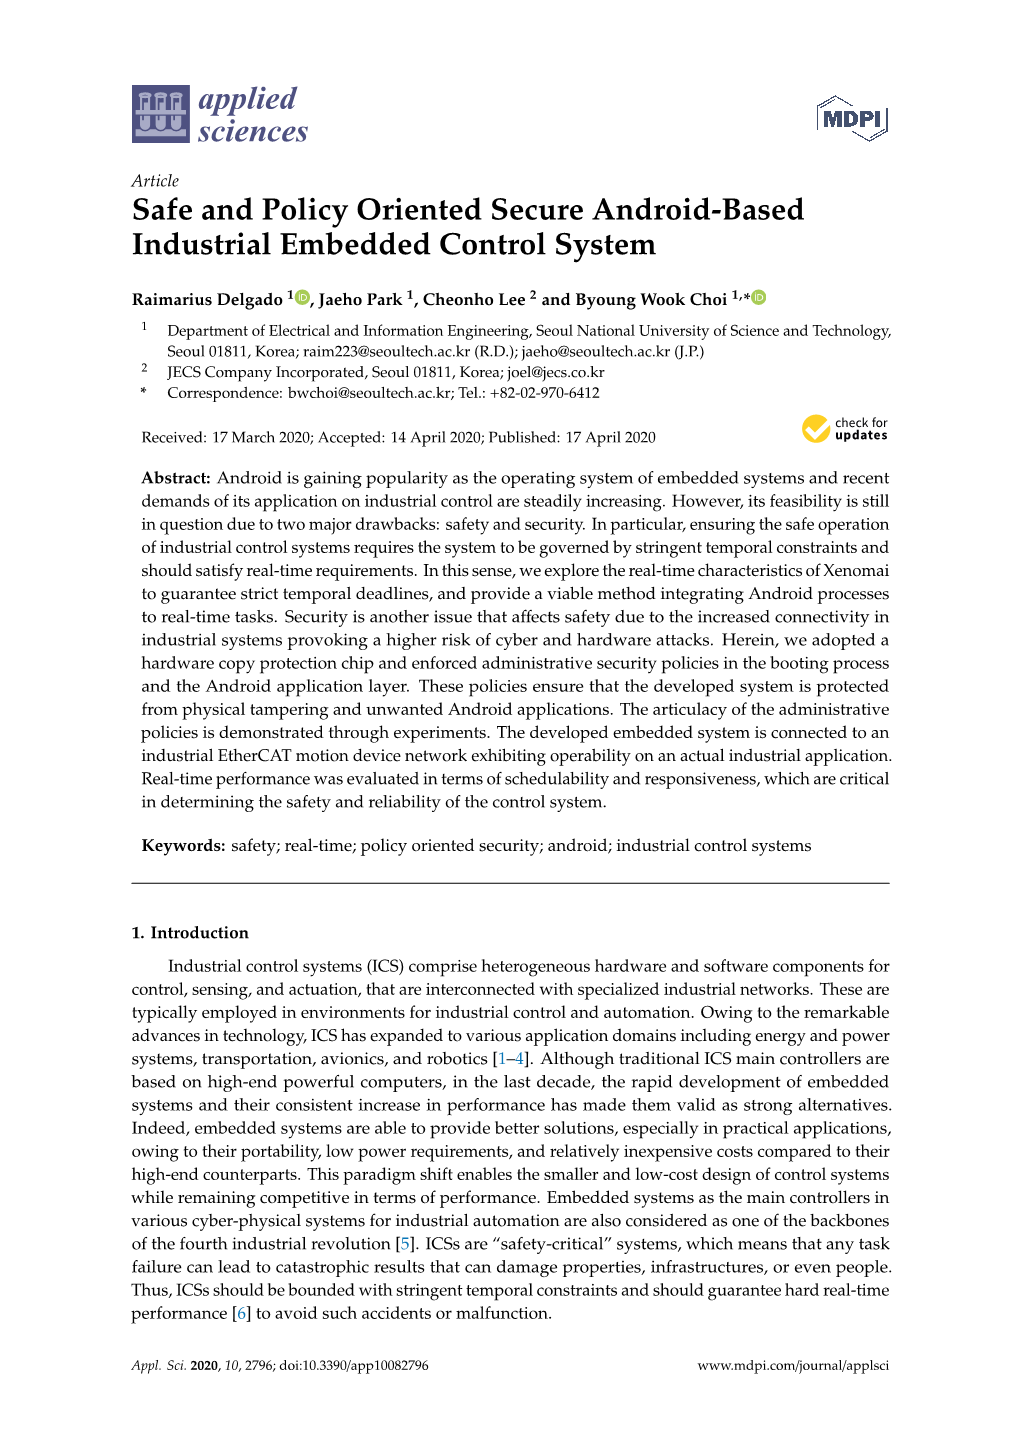 Safe and Policy Oriented Secure Android-Based Industrial Embedded Control System